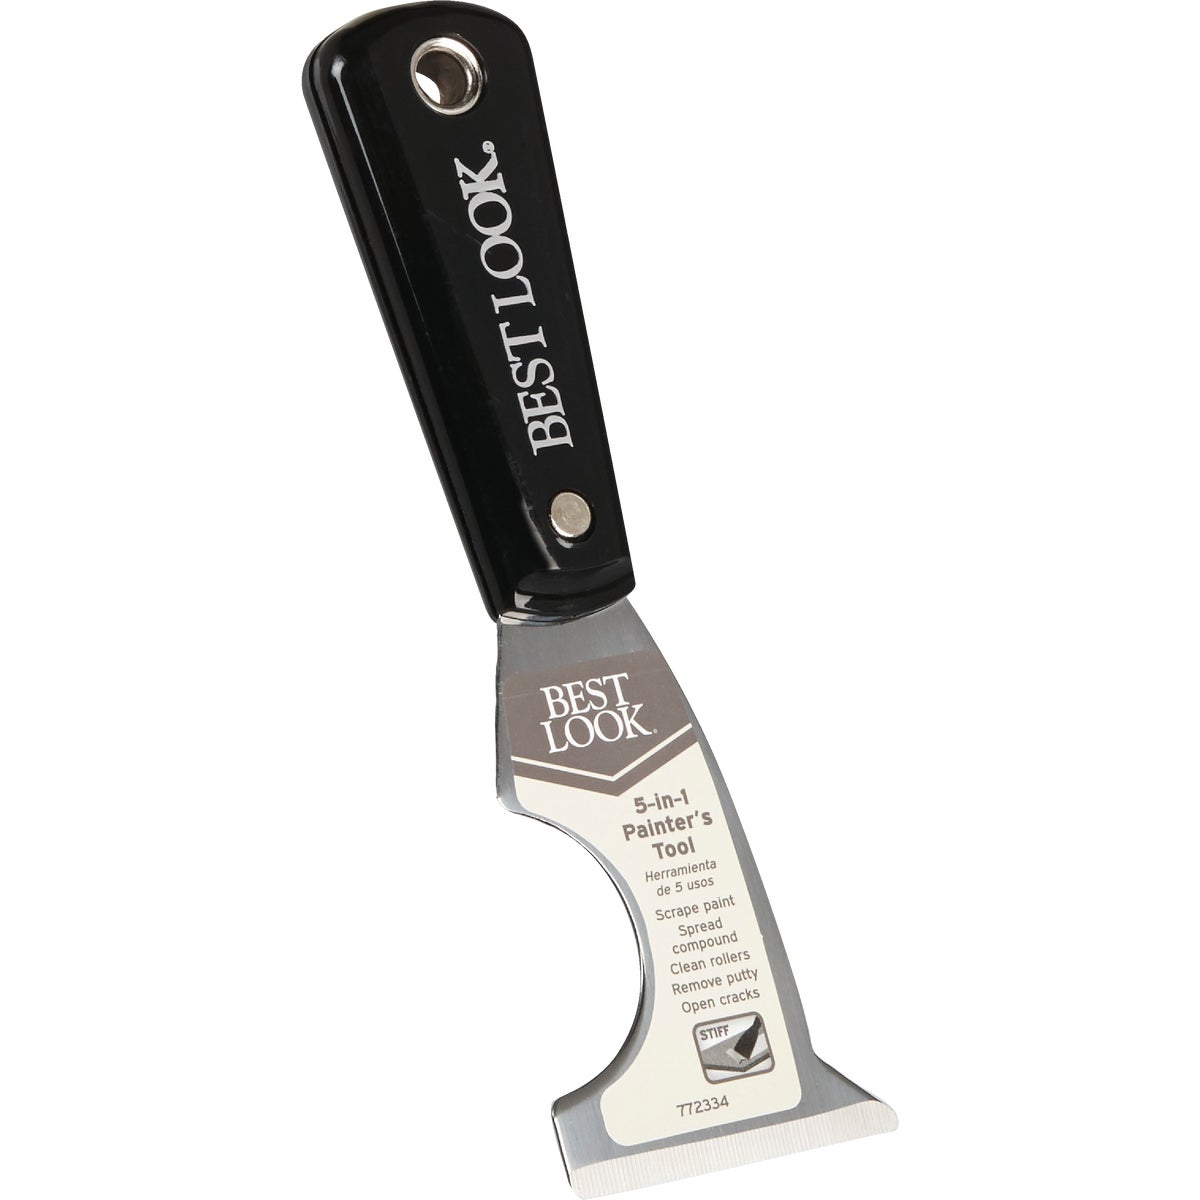 Item 772334, 5-in-1 multi-tool has a mirror finish, solvent resistant blade and a nylon 